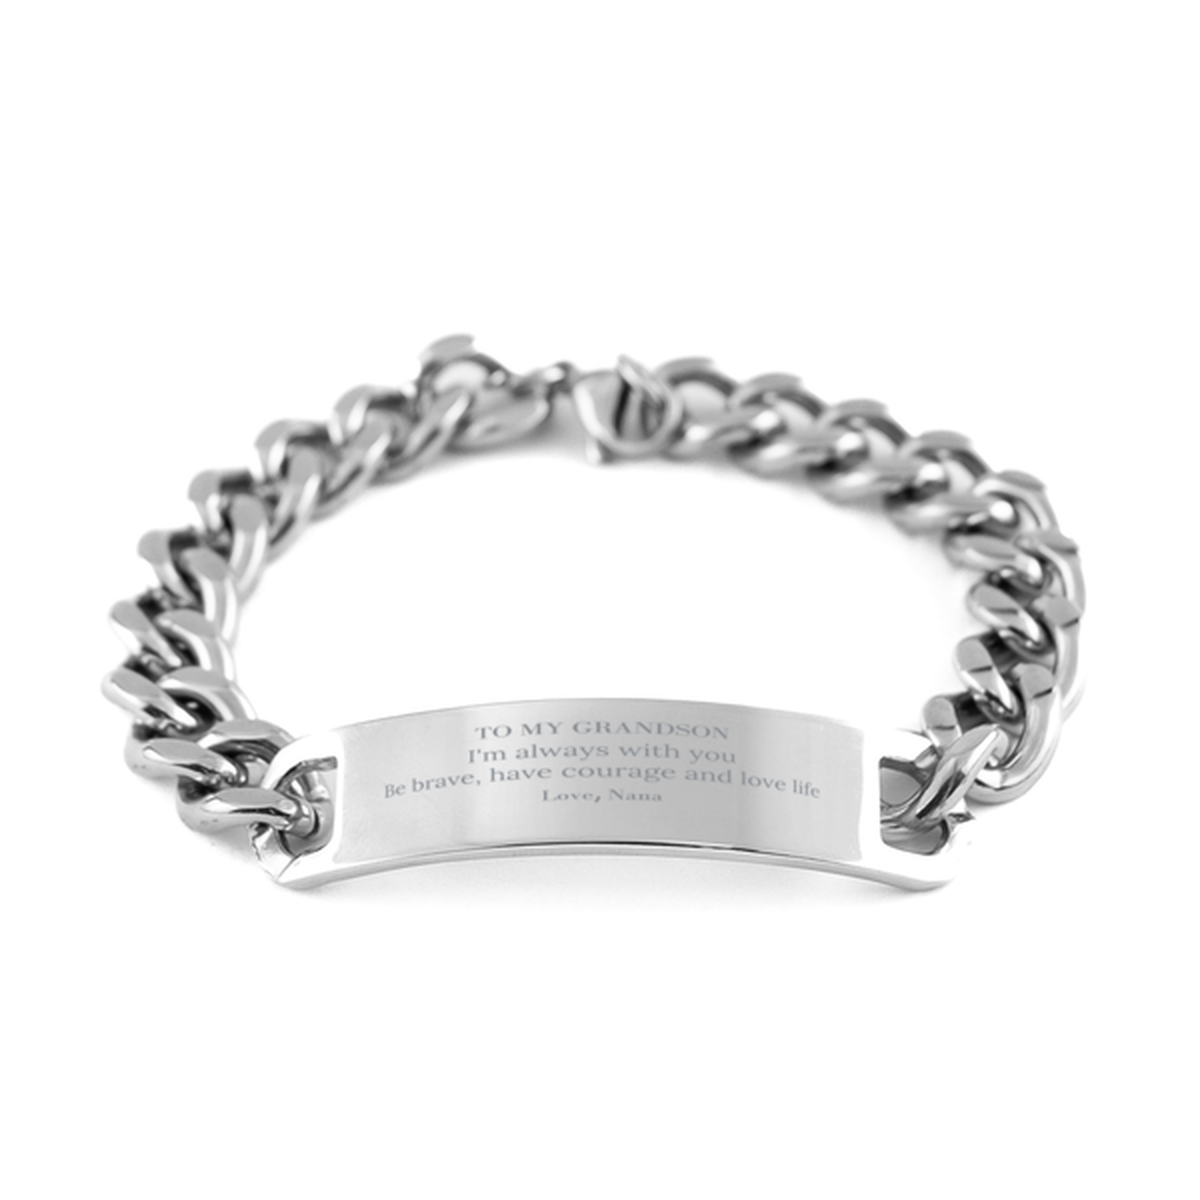 To My Grandson Gifts from Nana, Unique Cuban Chain Stainless Steel Bracelet Inspirational Christmas Birthday Graduation Gifts for Grandson I'm always with you. Be brave, have courage and love life. Love, Nana